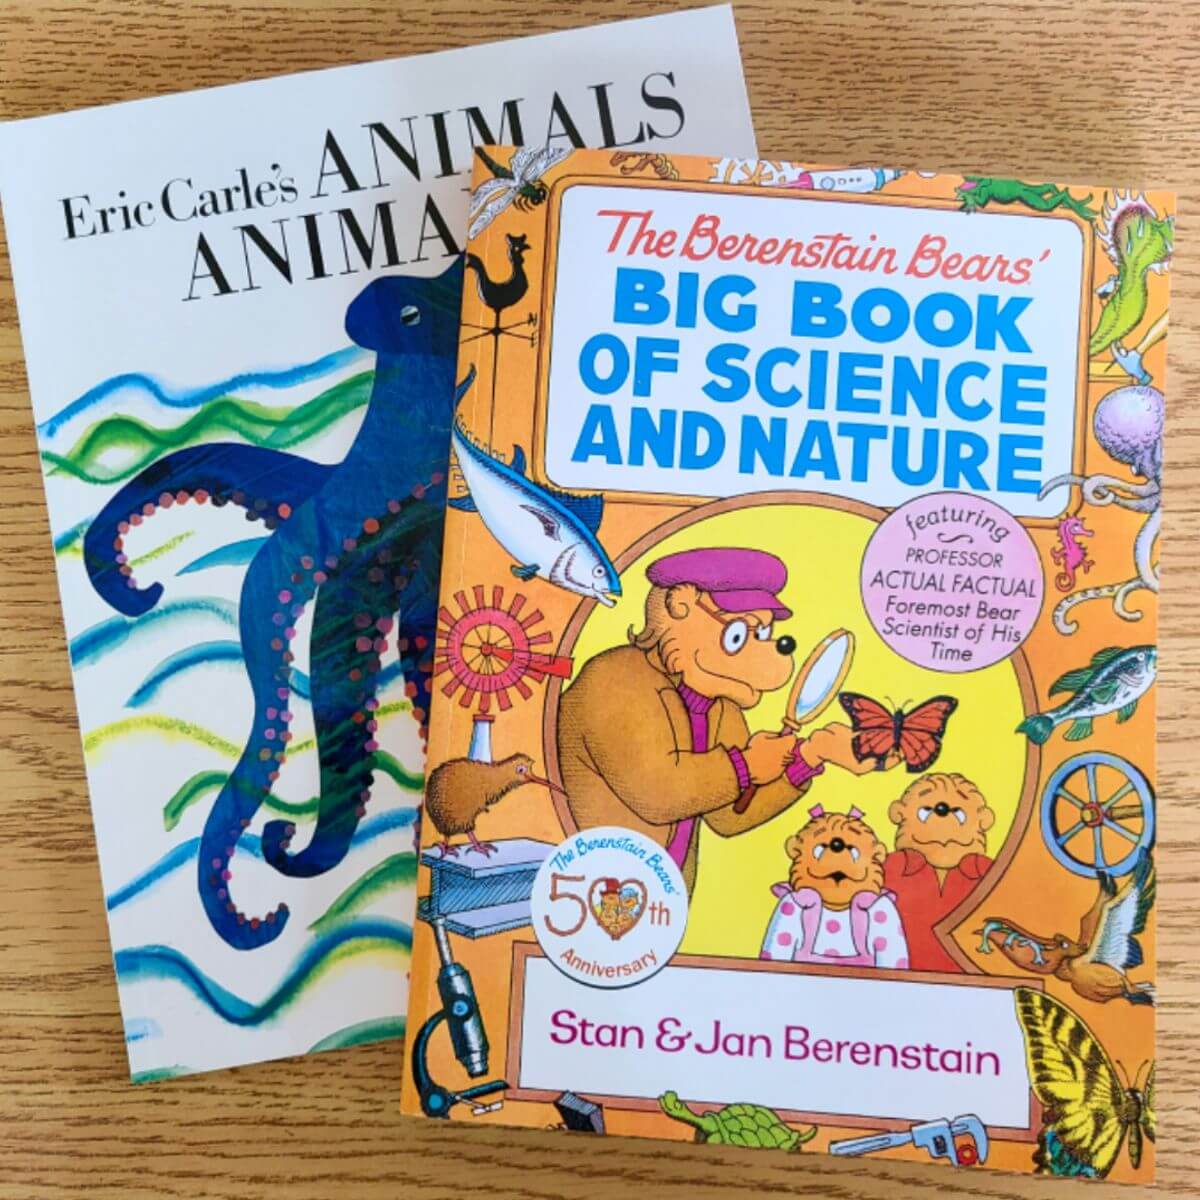 Image of 2 children's books entitled Eric Carle's Animals, and The Berenstain Bears' Big Book of Science and Nature